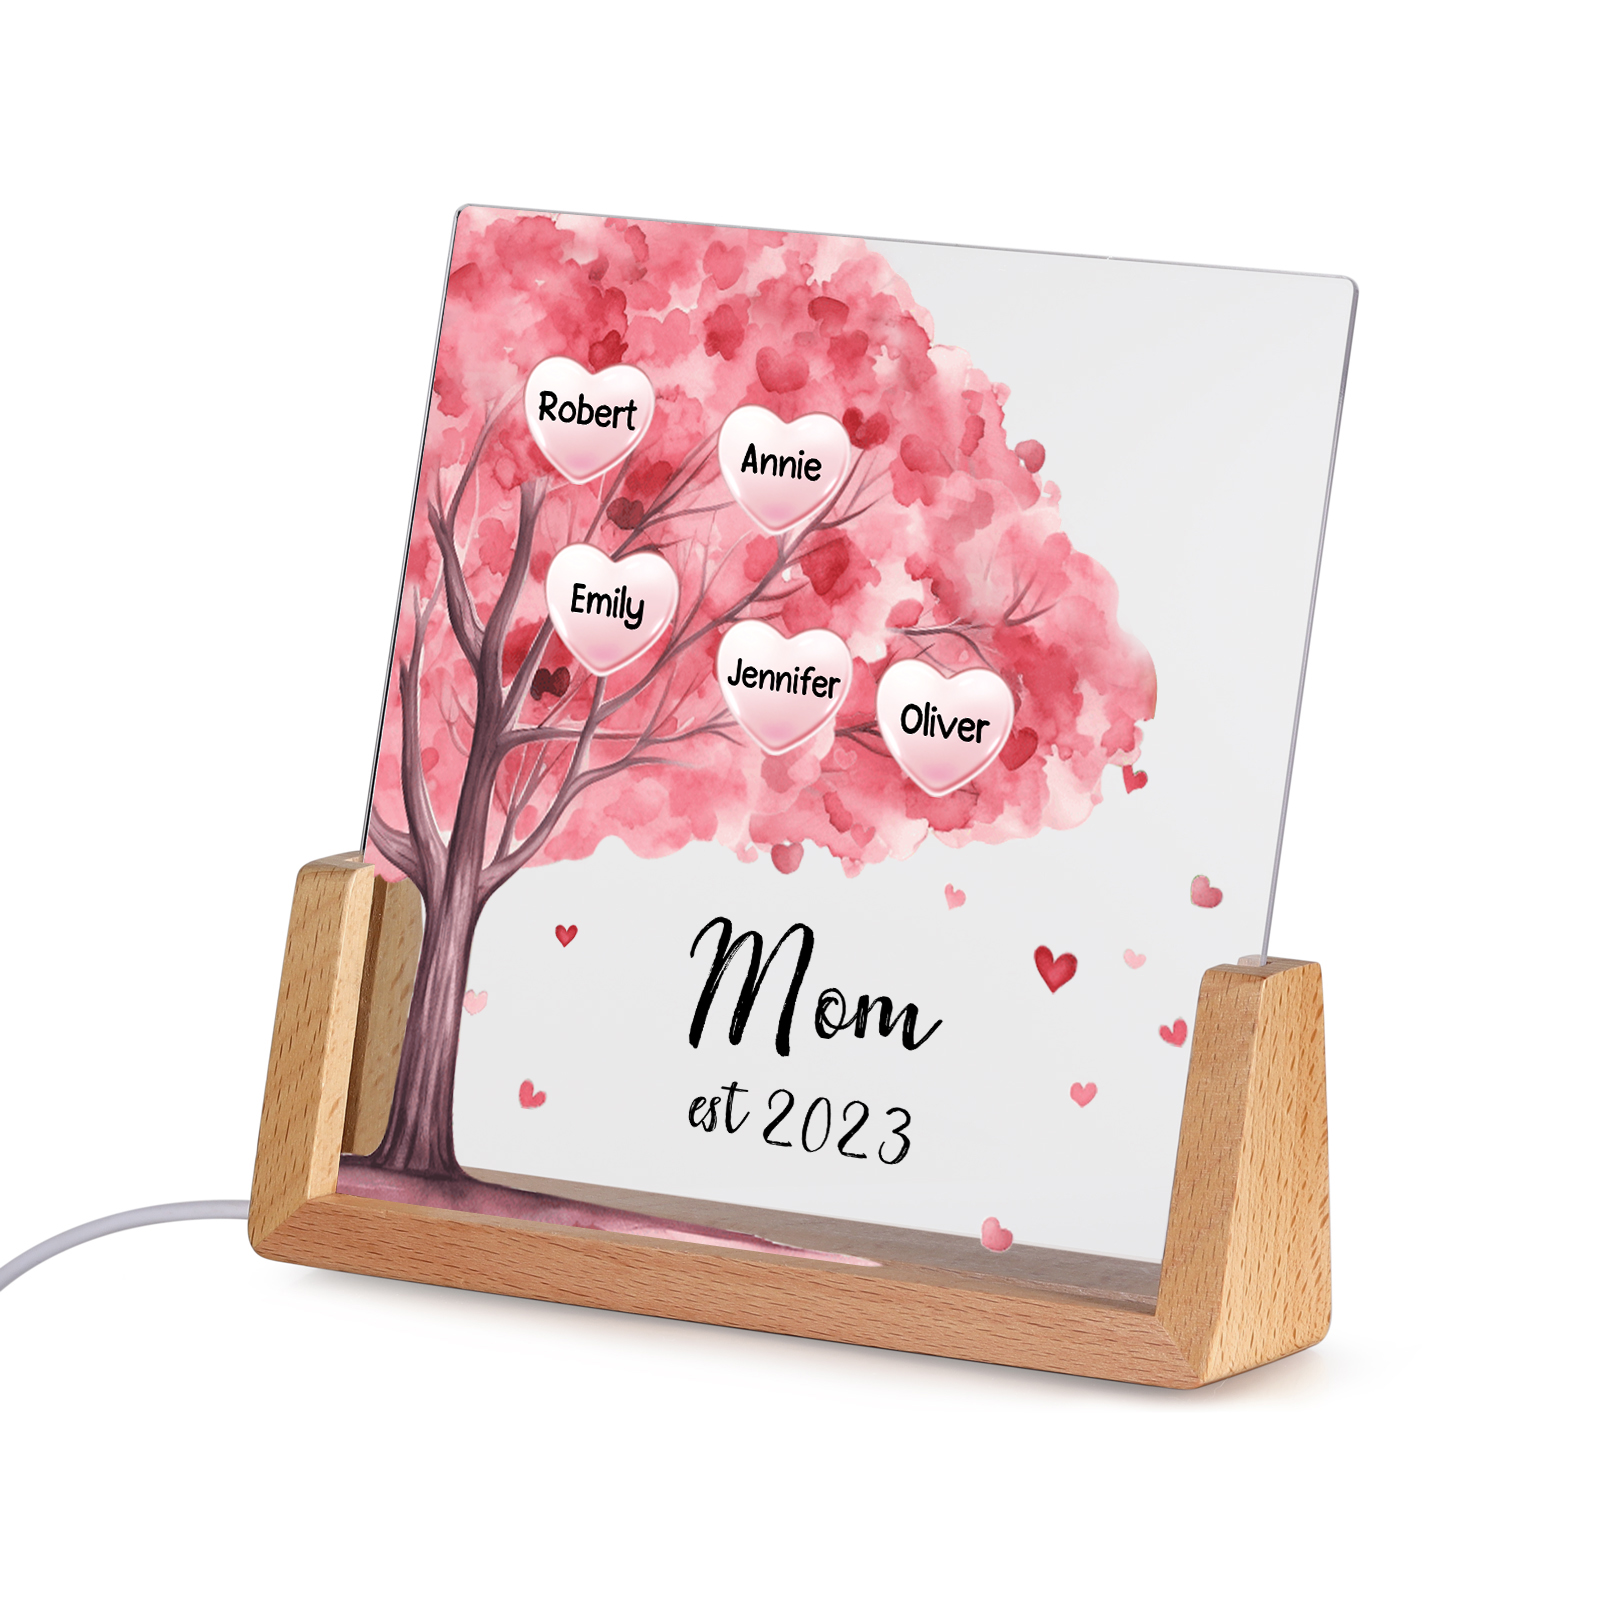 5 Names - Personalized Sakura Tree Night Light with Custom Text And Date LED Light, Gift for Mom